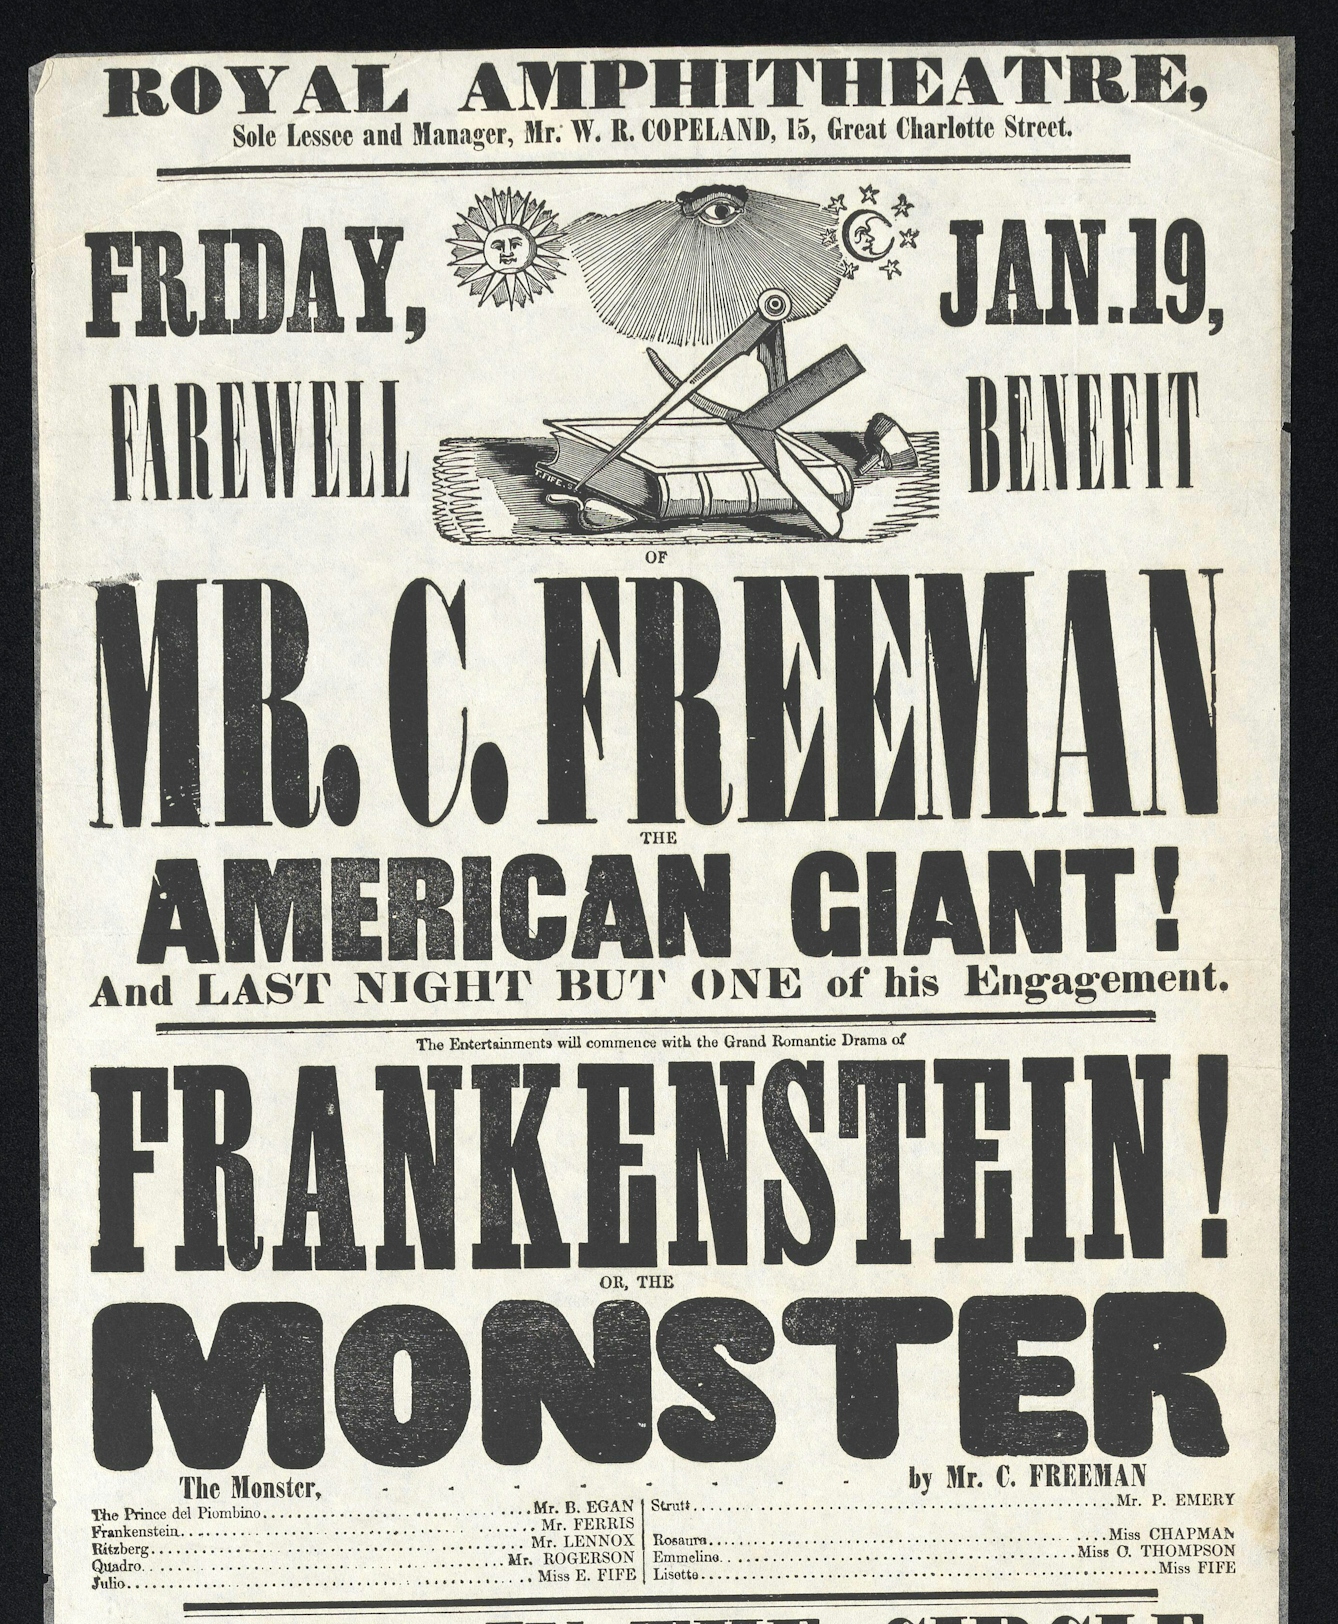 A crudely printed advertisement for performances at the Royal Amphitheatre, London. Events include Mr C Freeman the American Giant and a theatrical performance of Frankenstein! Or The Monster by Mr C. Freeman. 